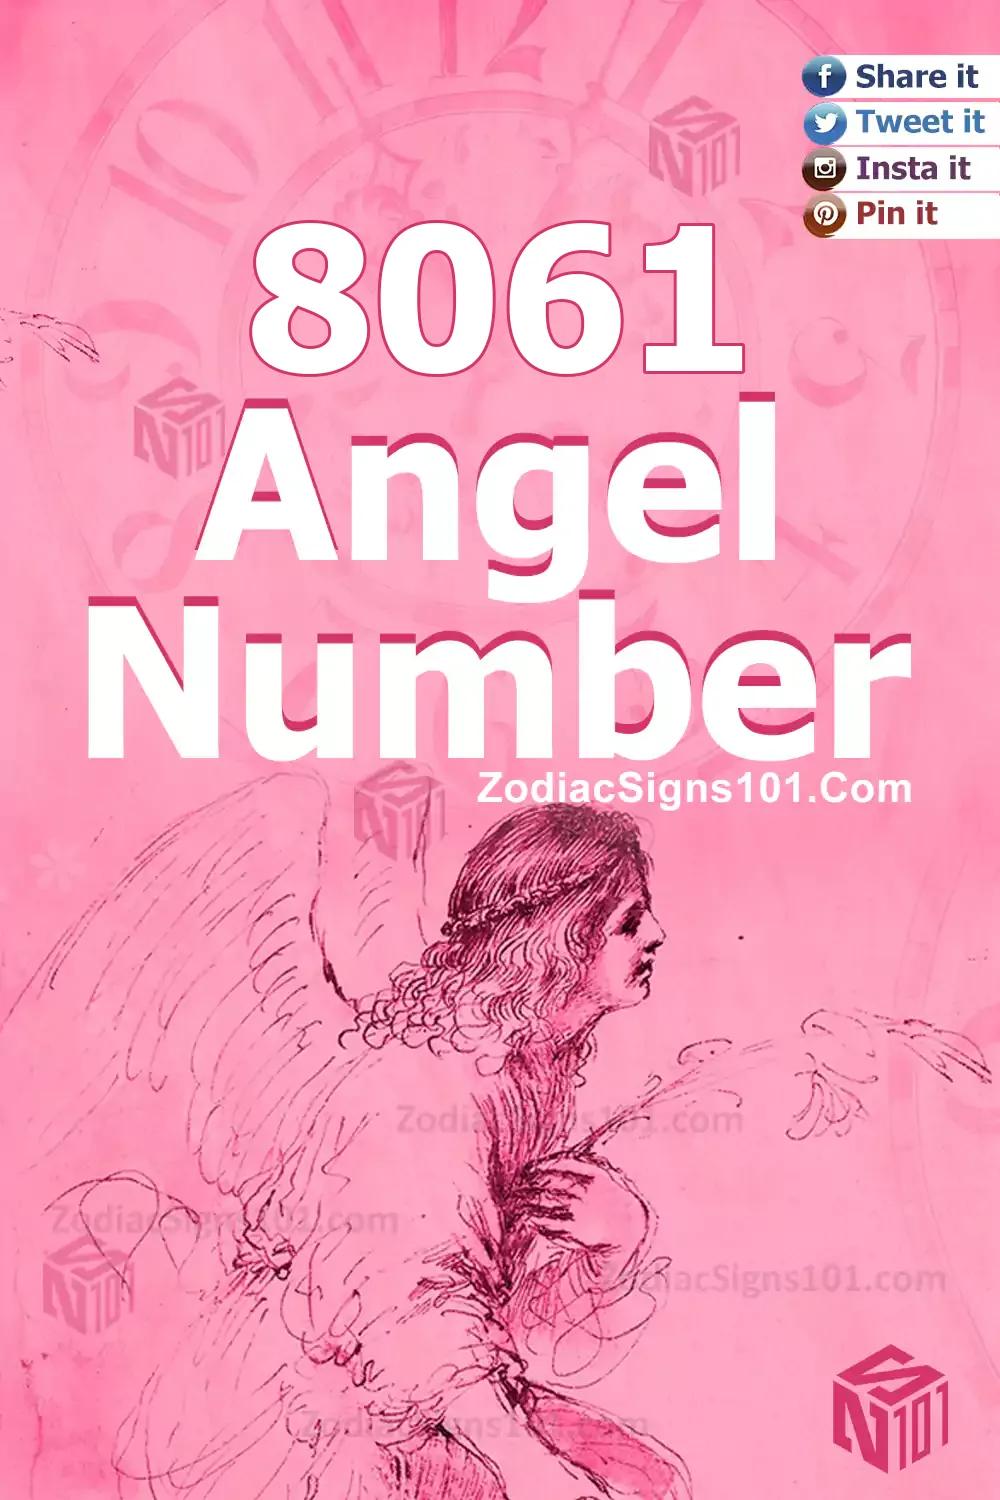 8061 Angel Number Meaning